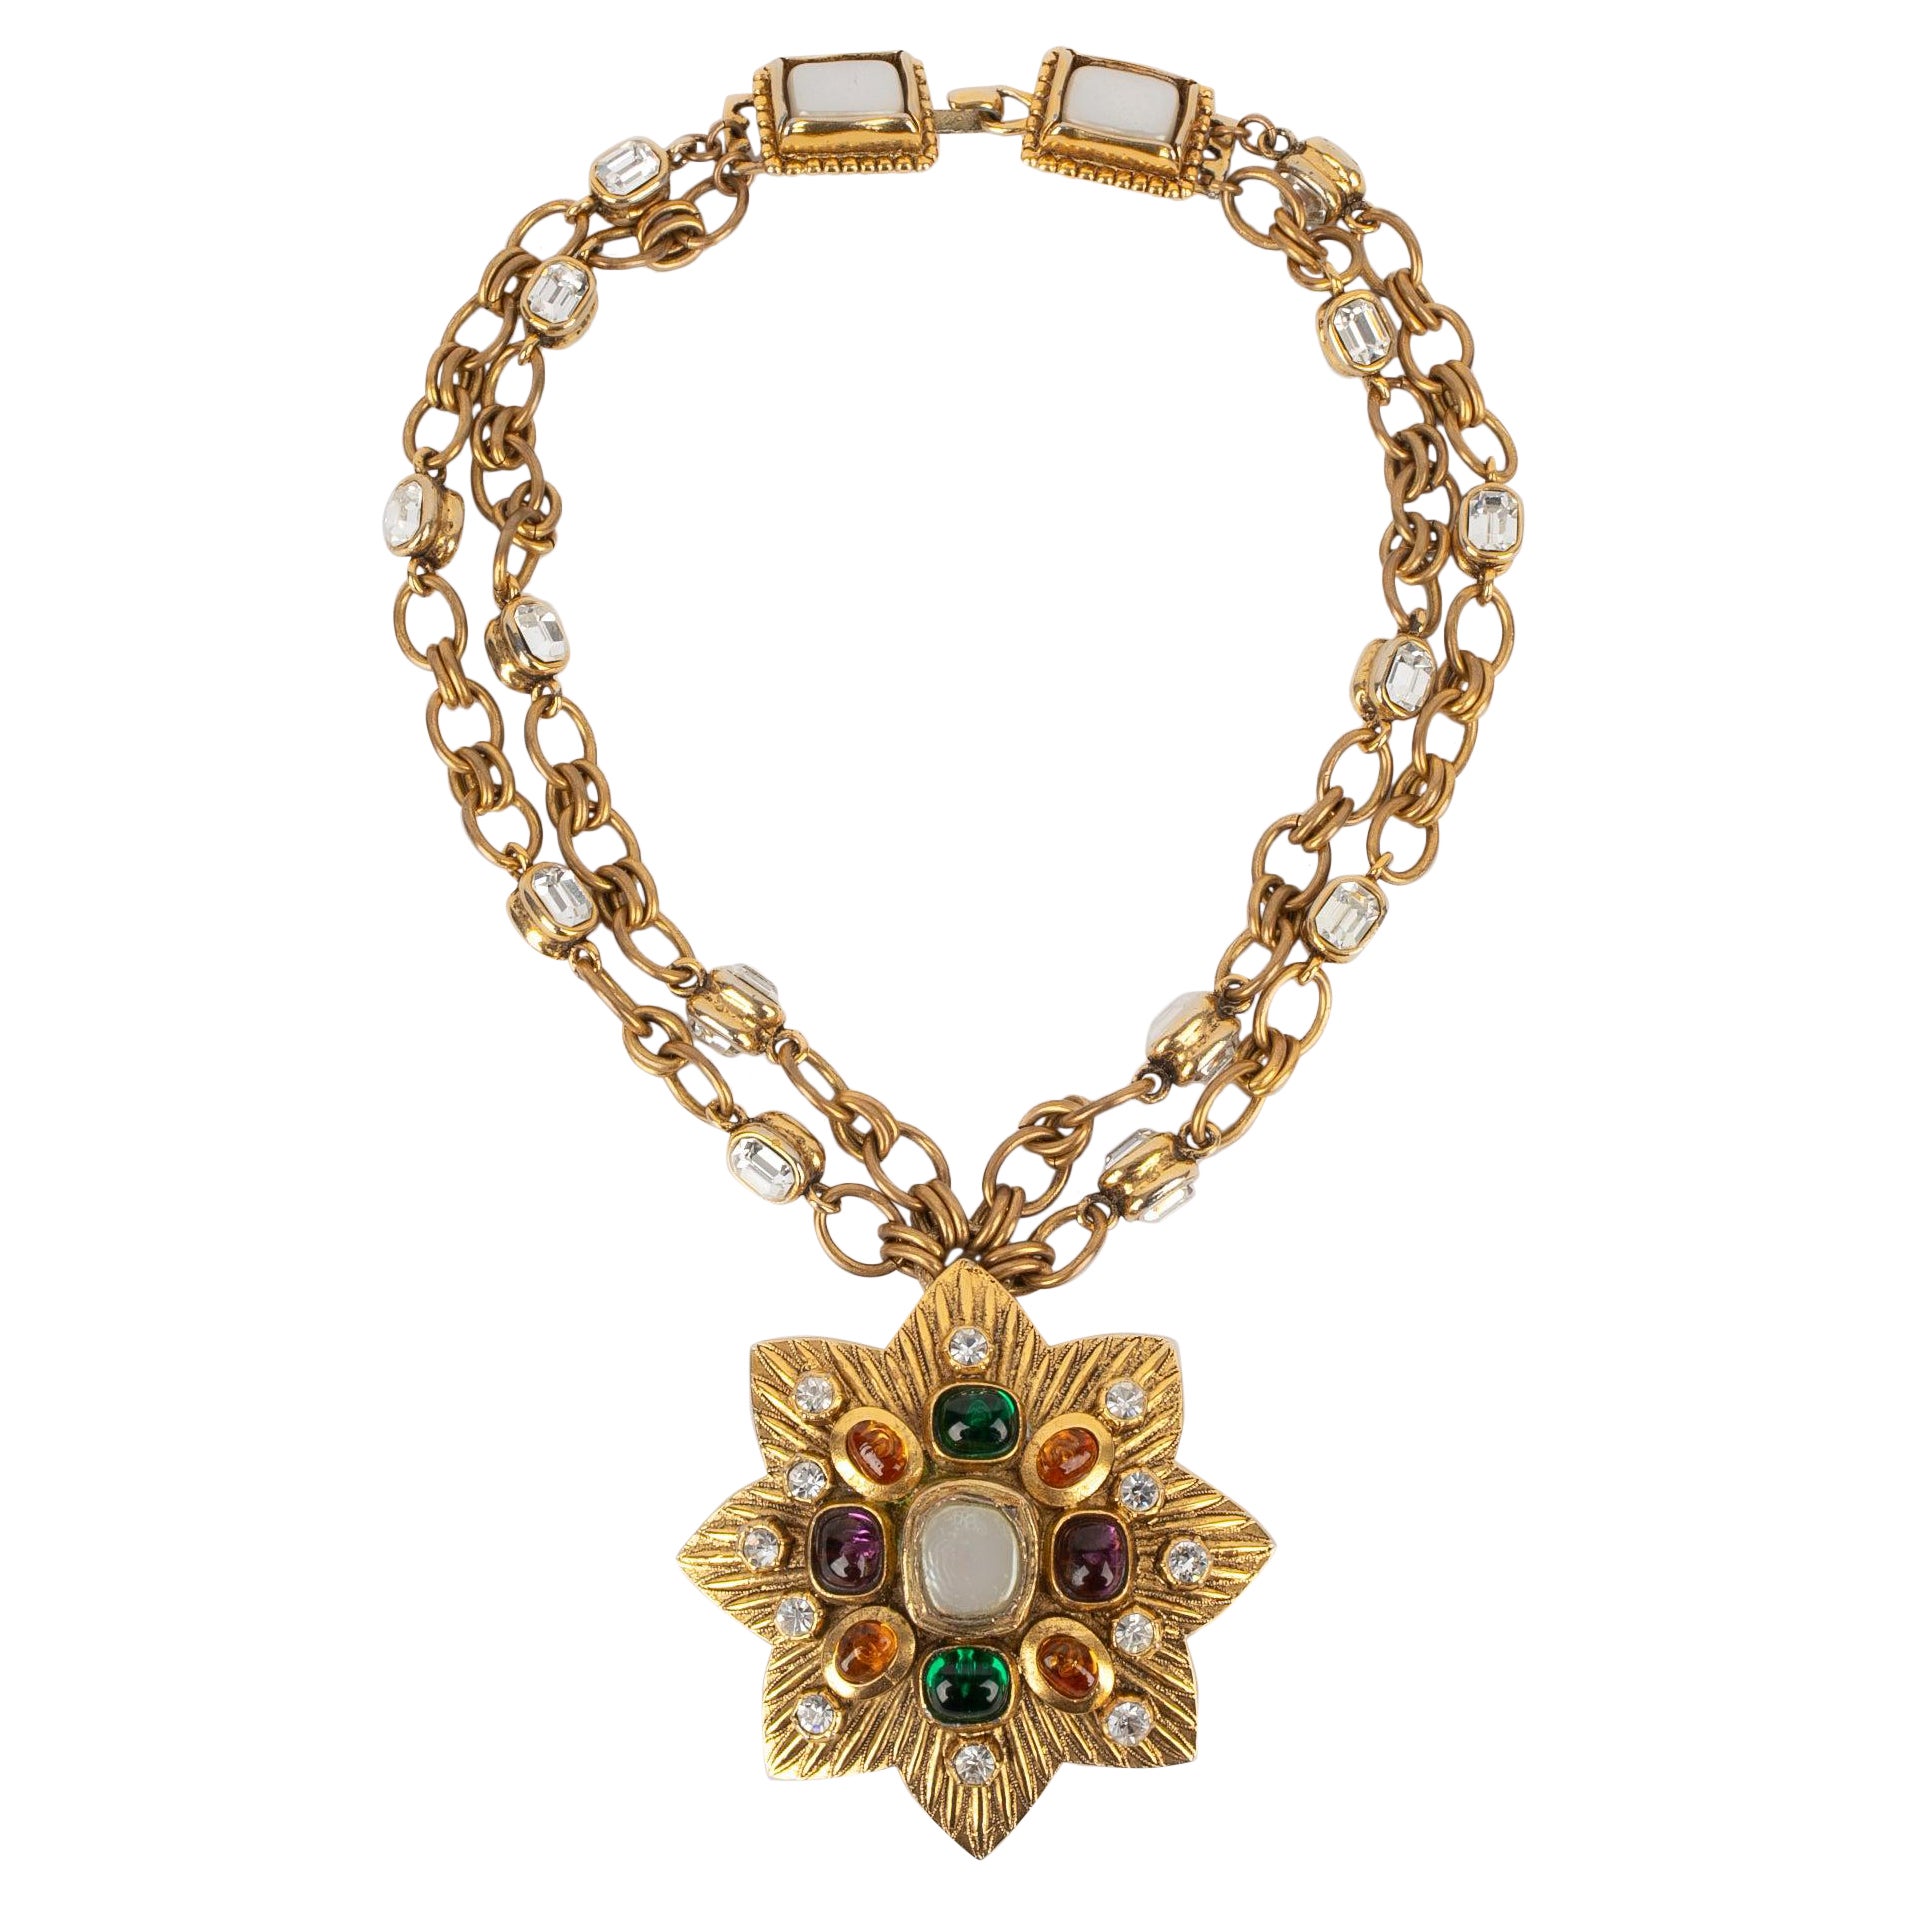 Chanel Golden Metal Two-row Necklace with Rhinestones and a Golden Metal Pendant For Sale